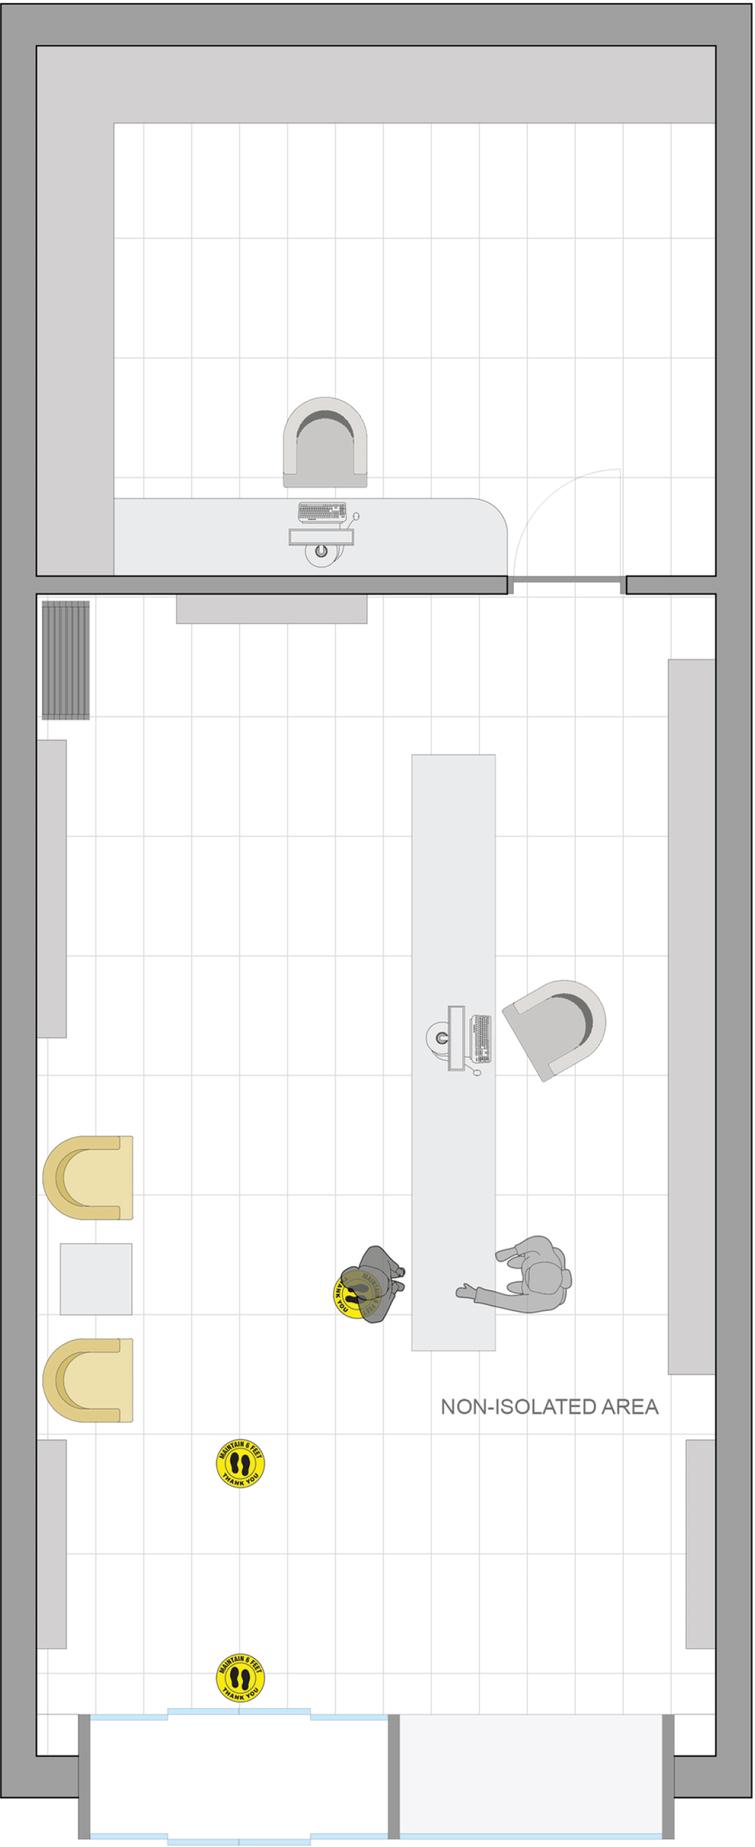 Plan view of the workplace without protection (the open areas are prone to contamination).